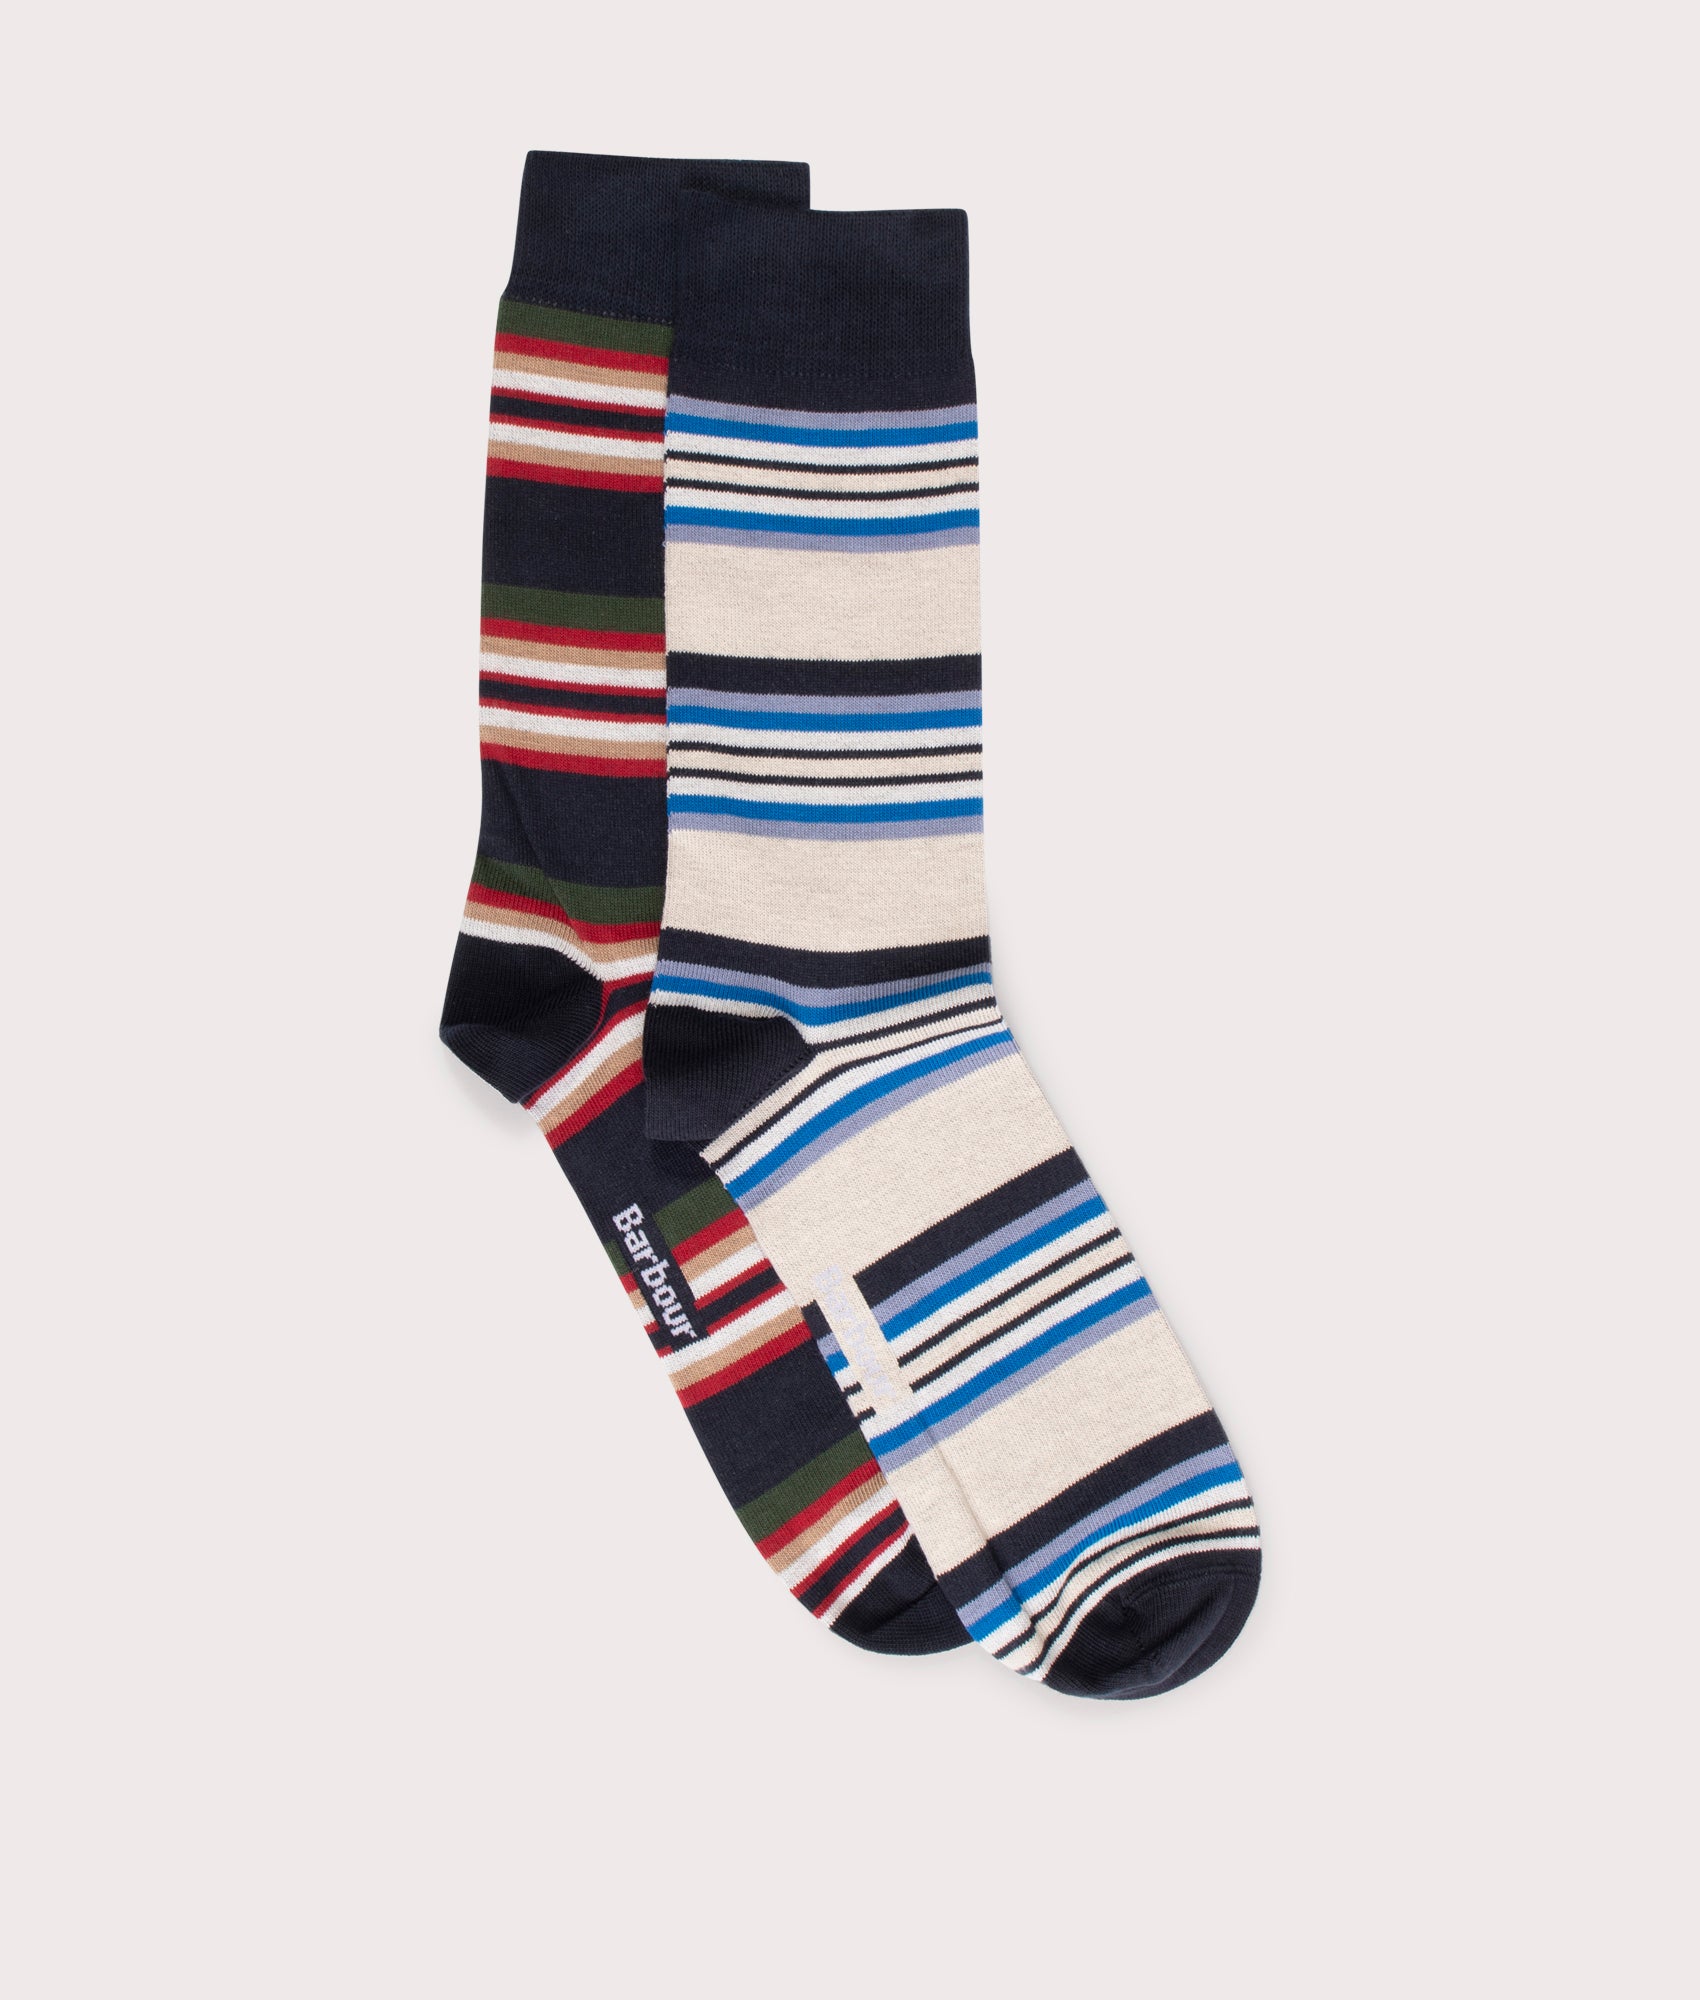 Barbour Lifestyle Mens Summer Stripe 2 Pack Socks - Colour: NY71 Navy Mix - Size: Large